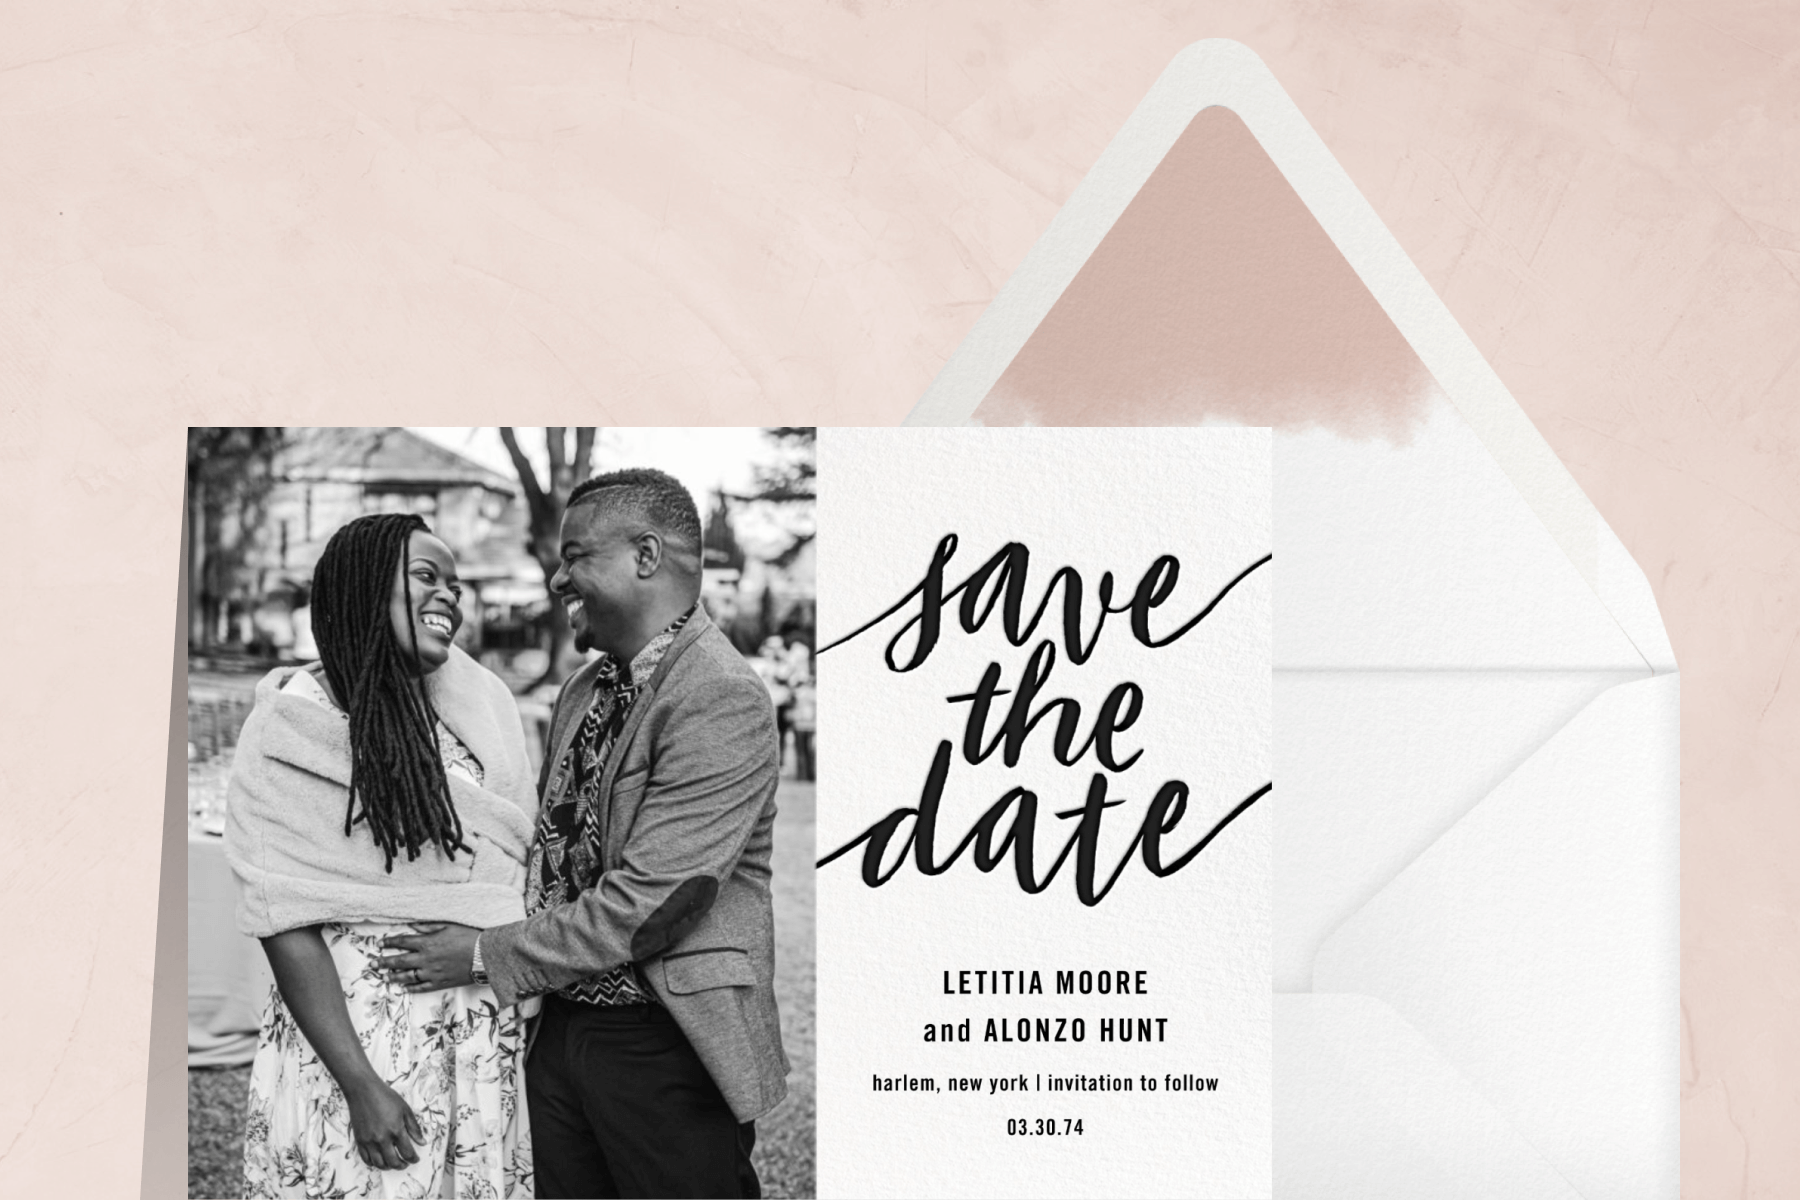 A save the date card with a black and white photo of a man and woman embracing on the left and “save the date” in black script beside an envelope with a pink dip-dyed liner.